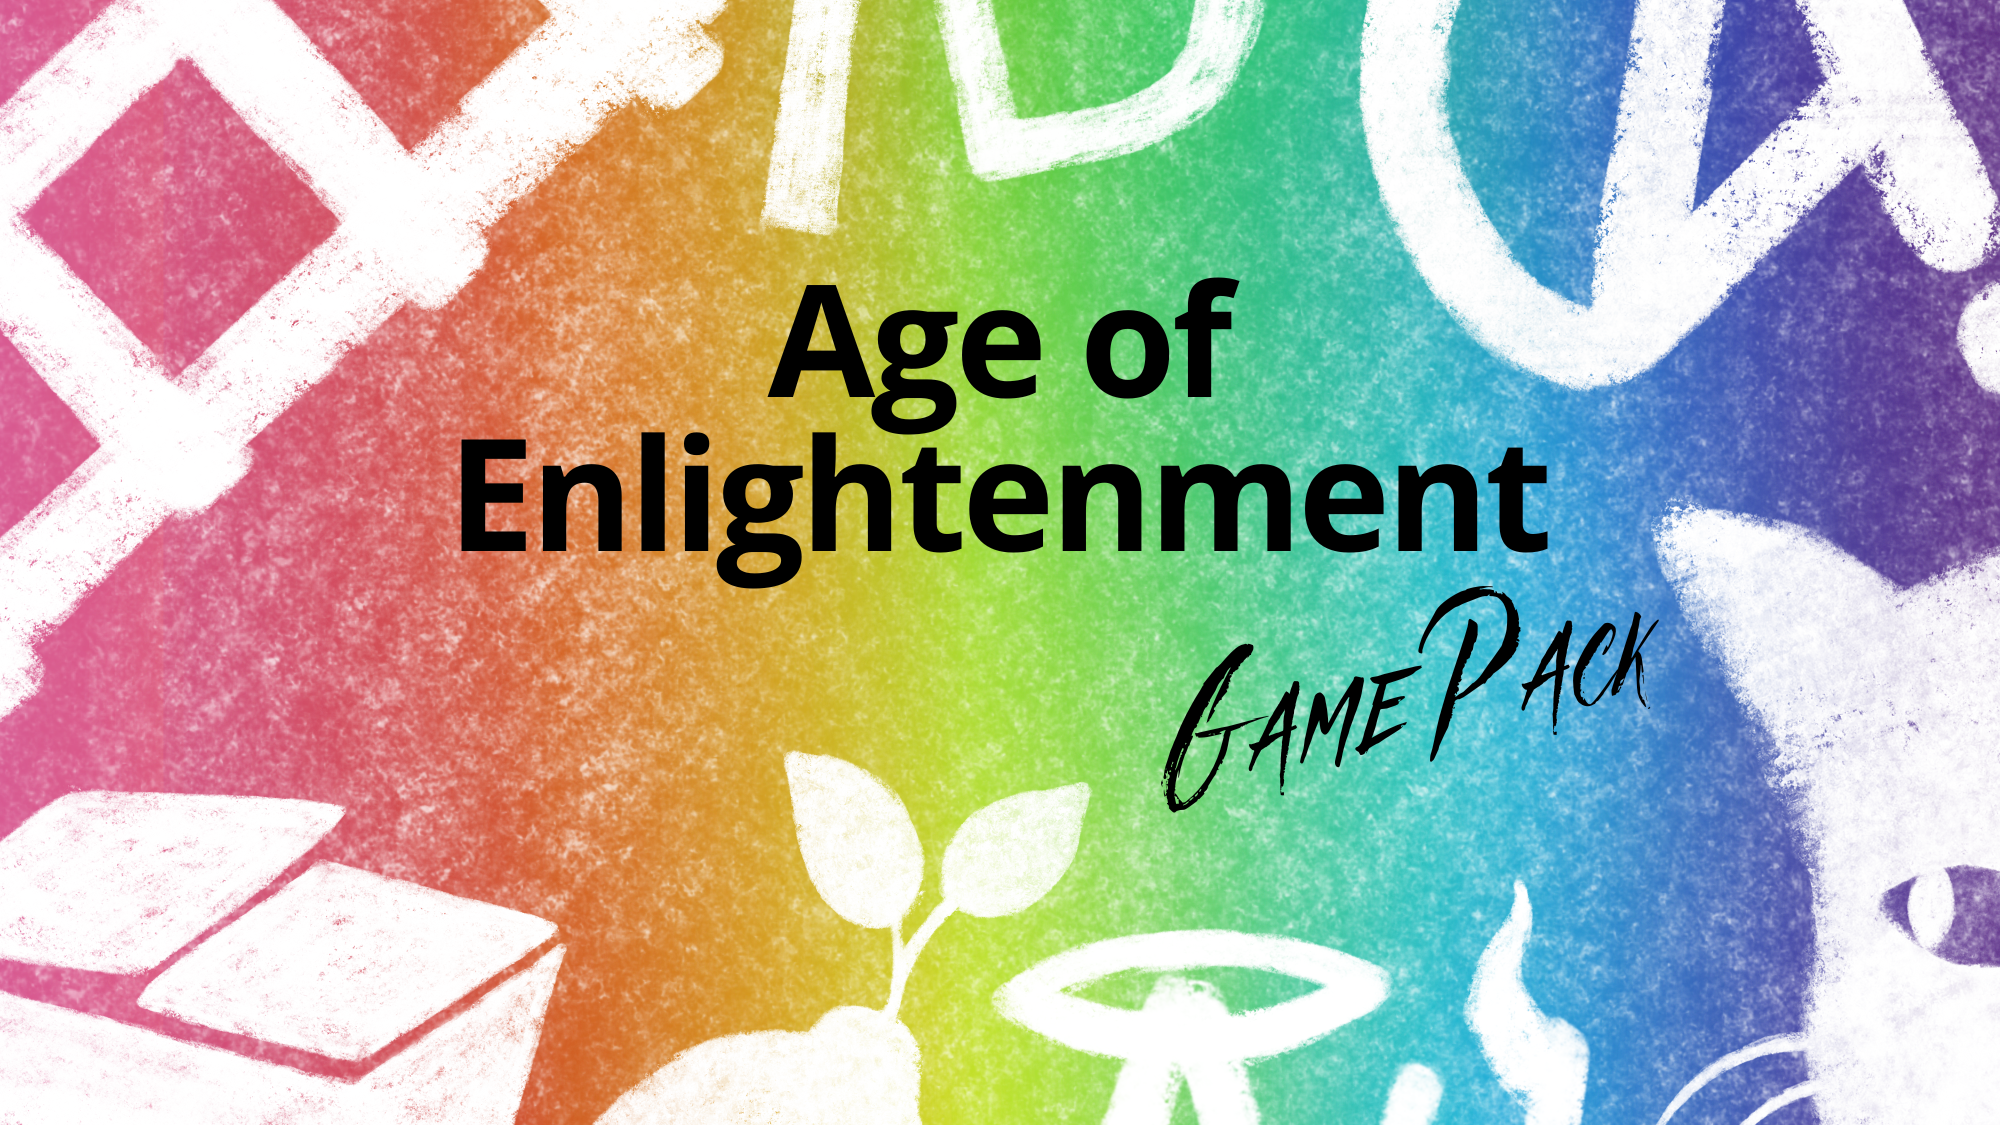 11 Age of Enlightenment